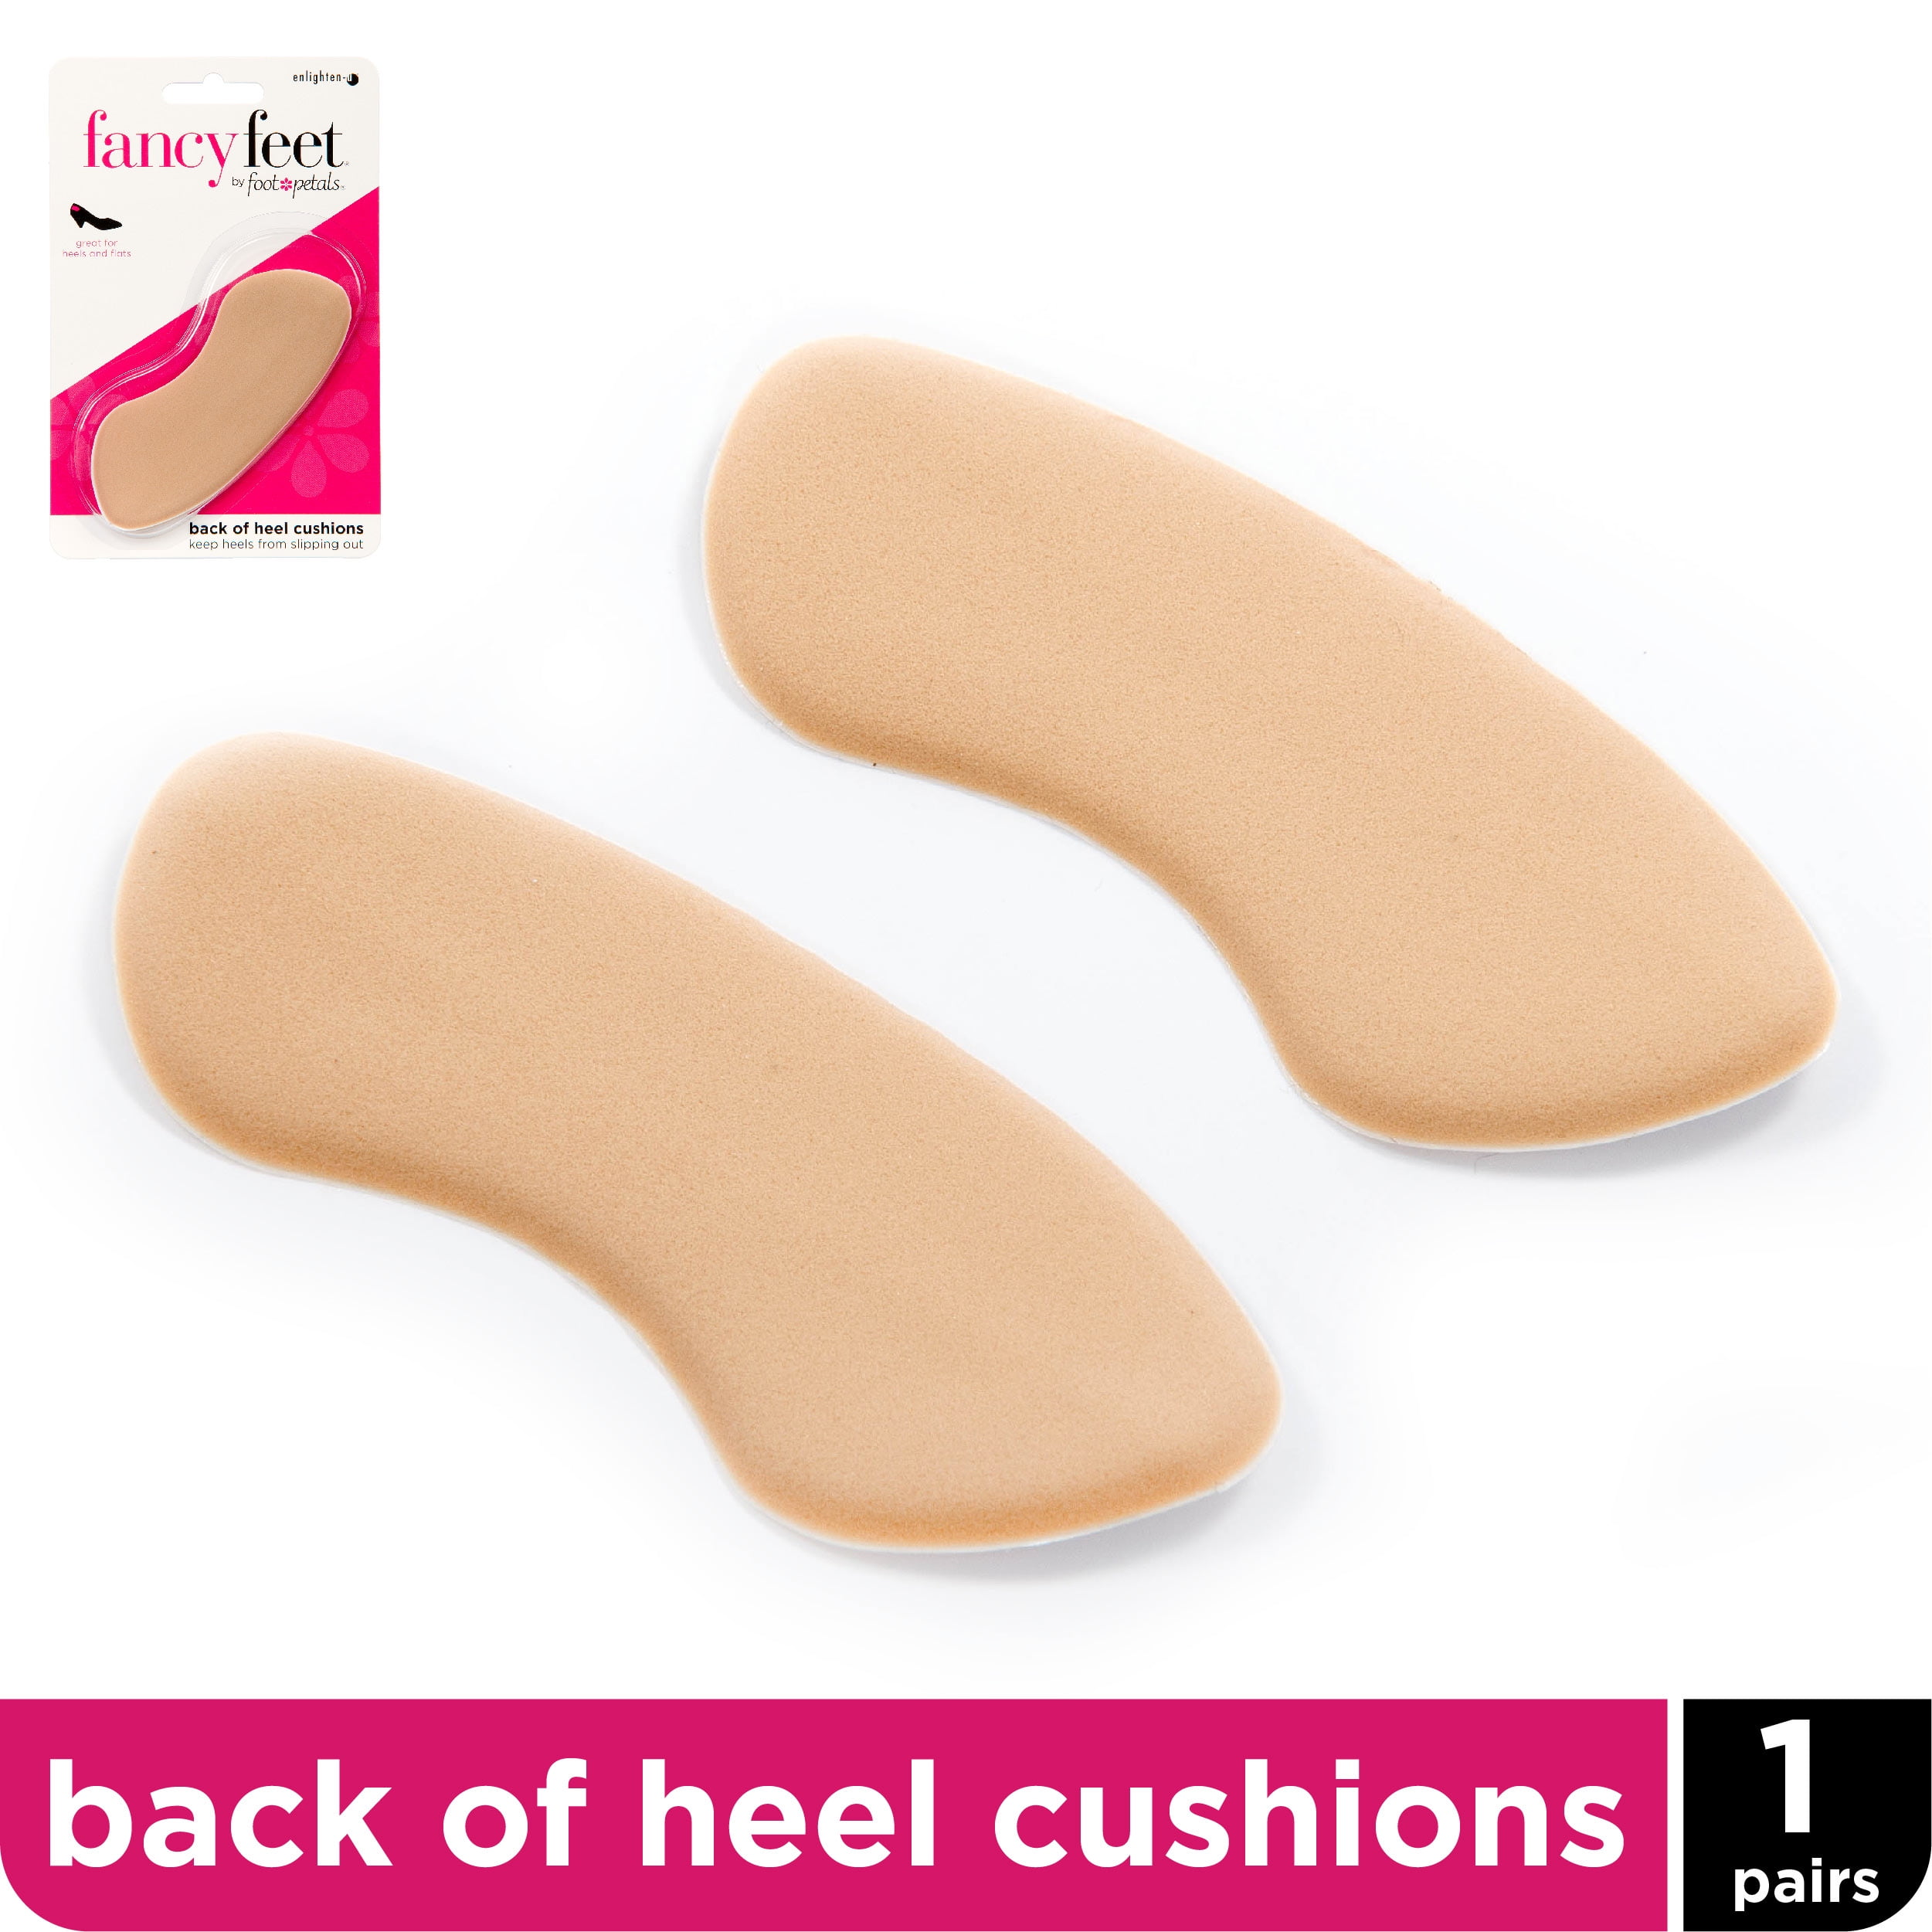 Fancy Feet Back of Heel Cushions One Pair of Cushioned Heel Inserts to Prevent Rubbing and Blisters from Uncomfortable Shoes Khaki 185c3bcf 1316 4d41 a990 45ba5c65350a 1.215e335c14bfd8bc28f1bc78c2400907